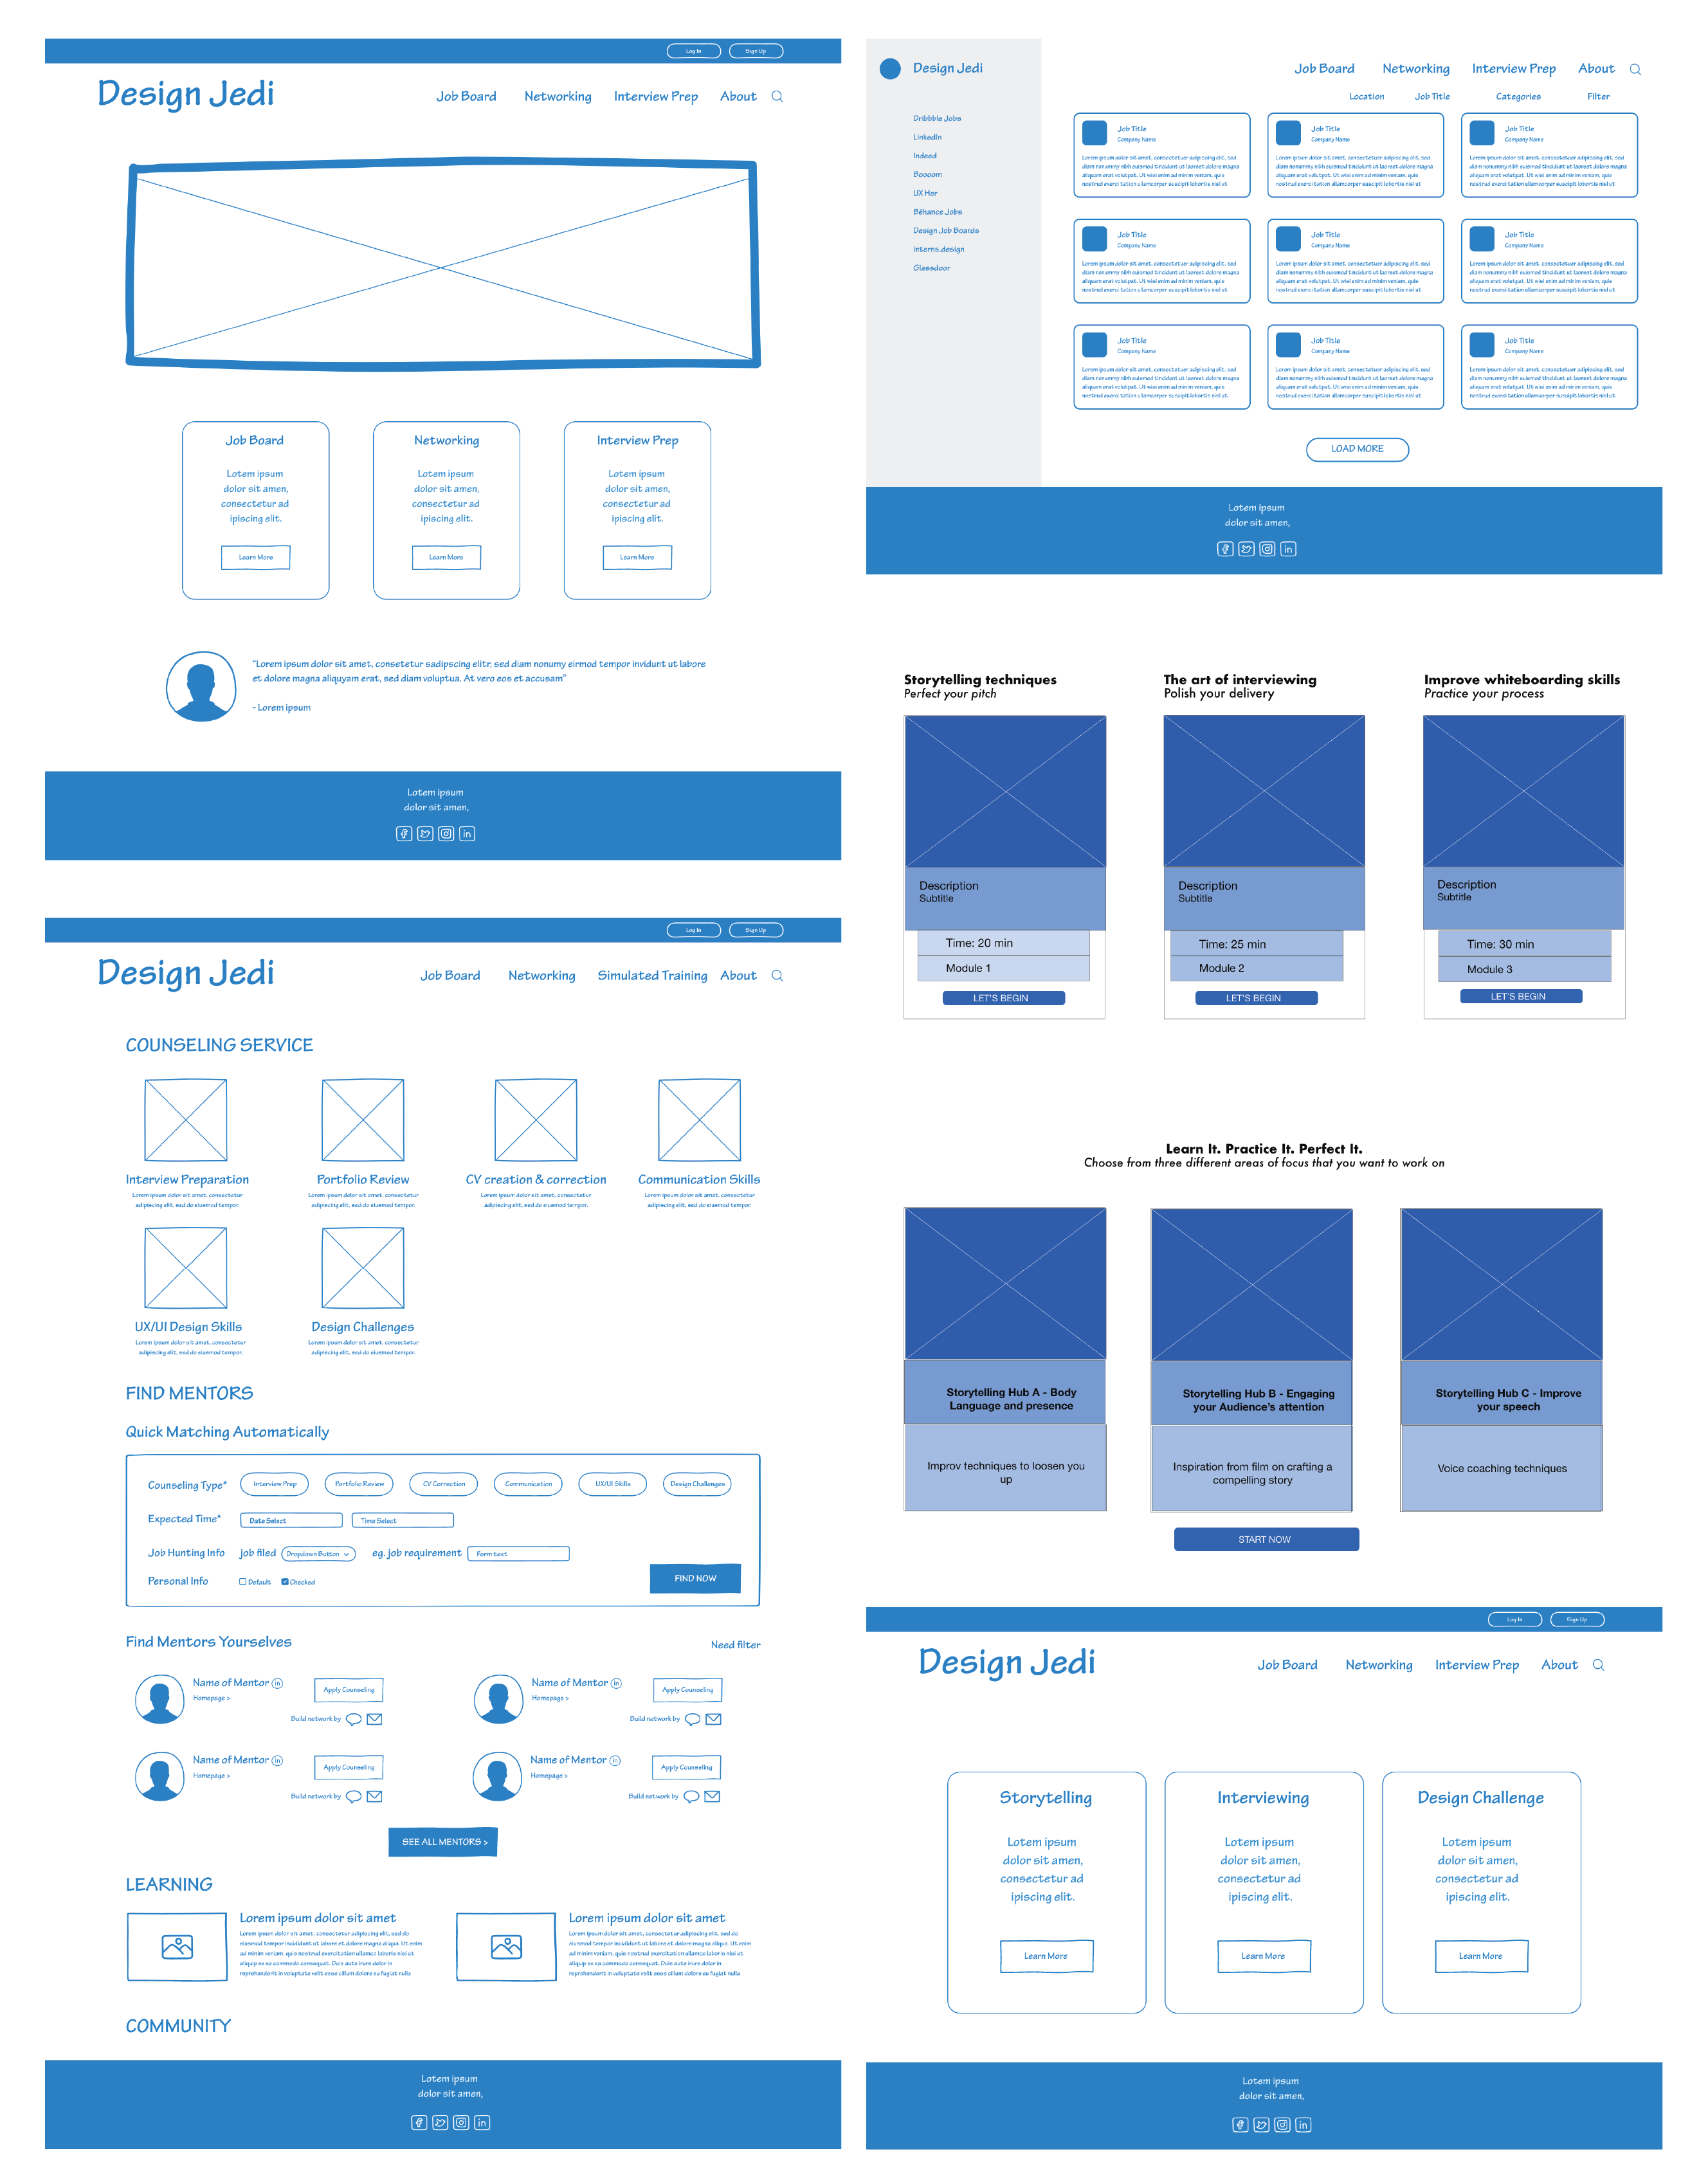 final wireframes for all the features